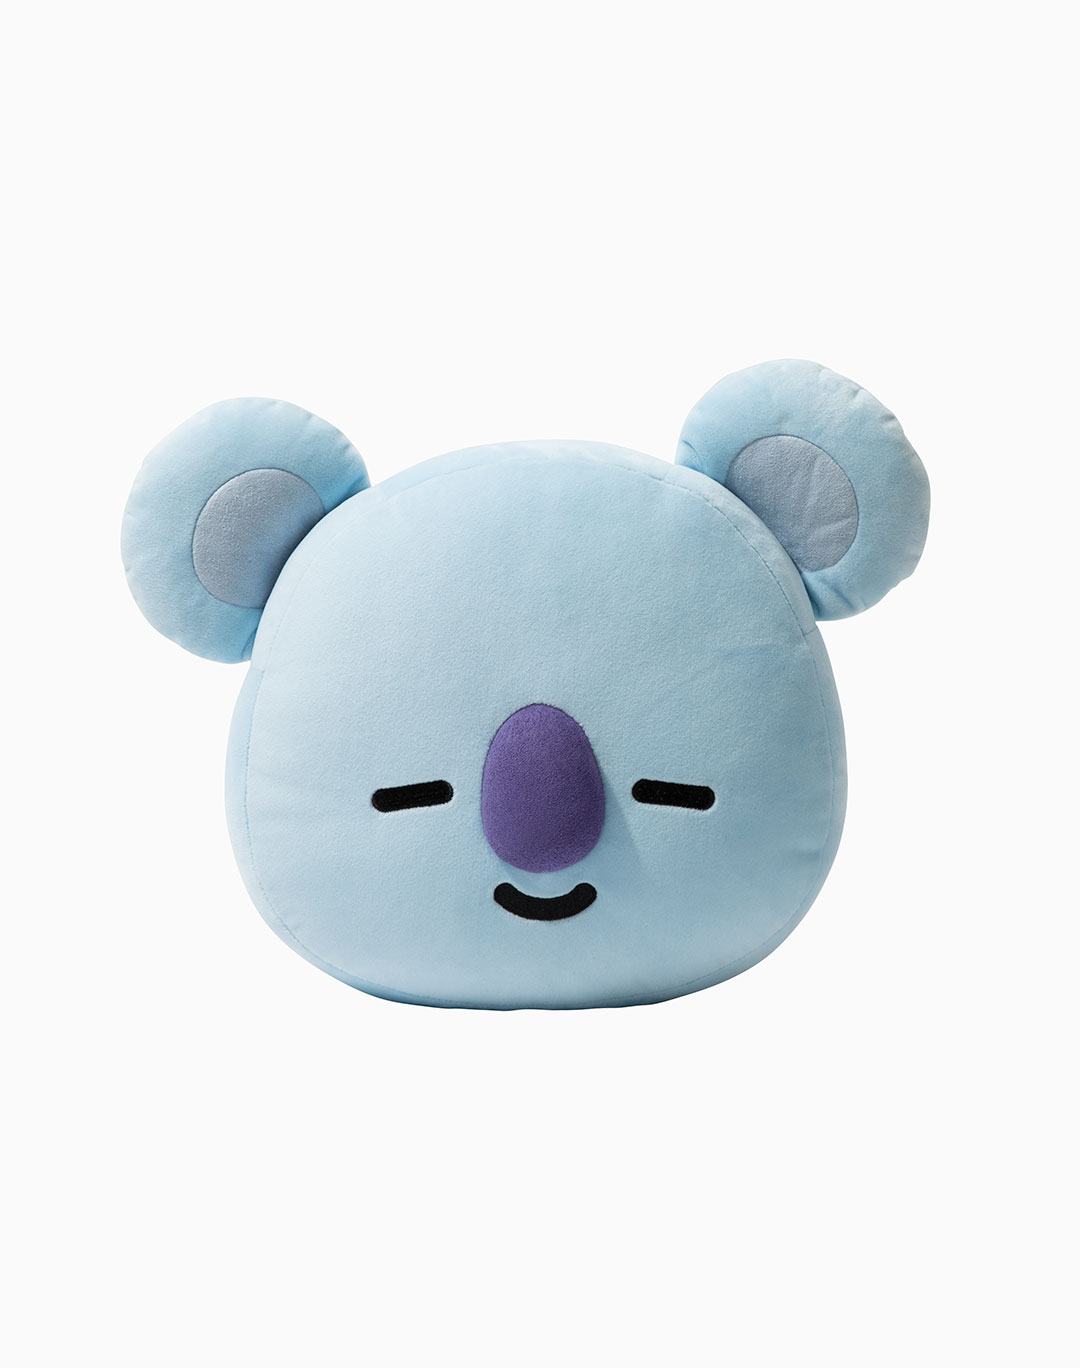 GIFTER'S BT21 Shooky Plush Pillow,BT-21 Animal Stuffed Pillow Soft ToY  -25cm (WASHABLE) - 35 cm - BT21 Shooky Plush Pillow,BT-21 Animal Stuffed  Pillow Soft ToY -25cm (WASHABLE) . Buy BT-21 toys in